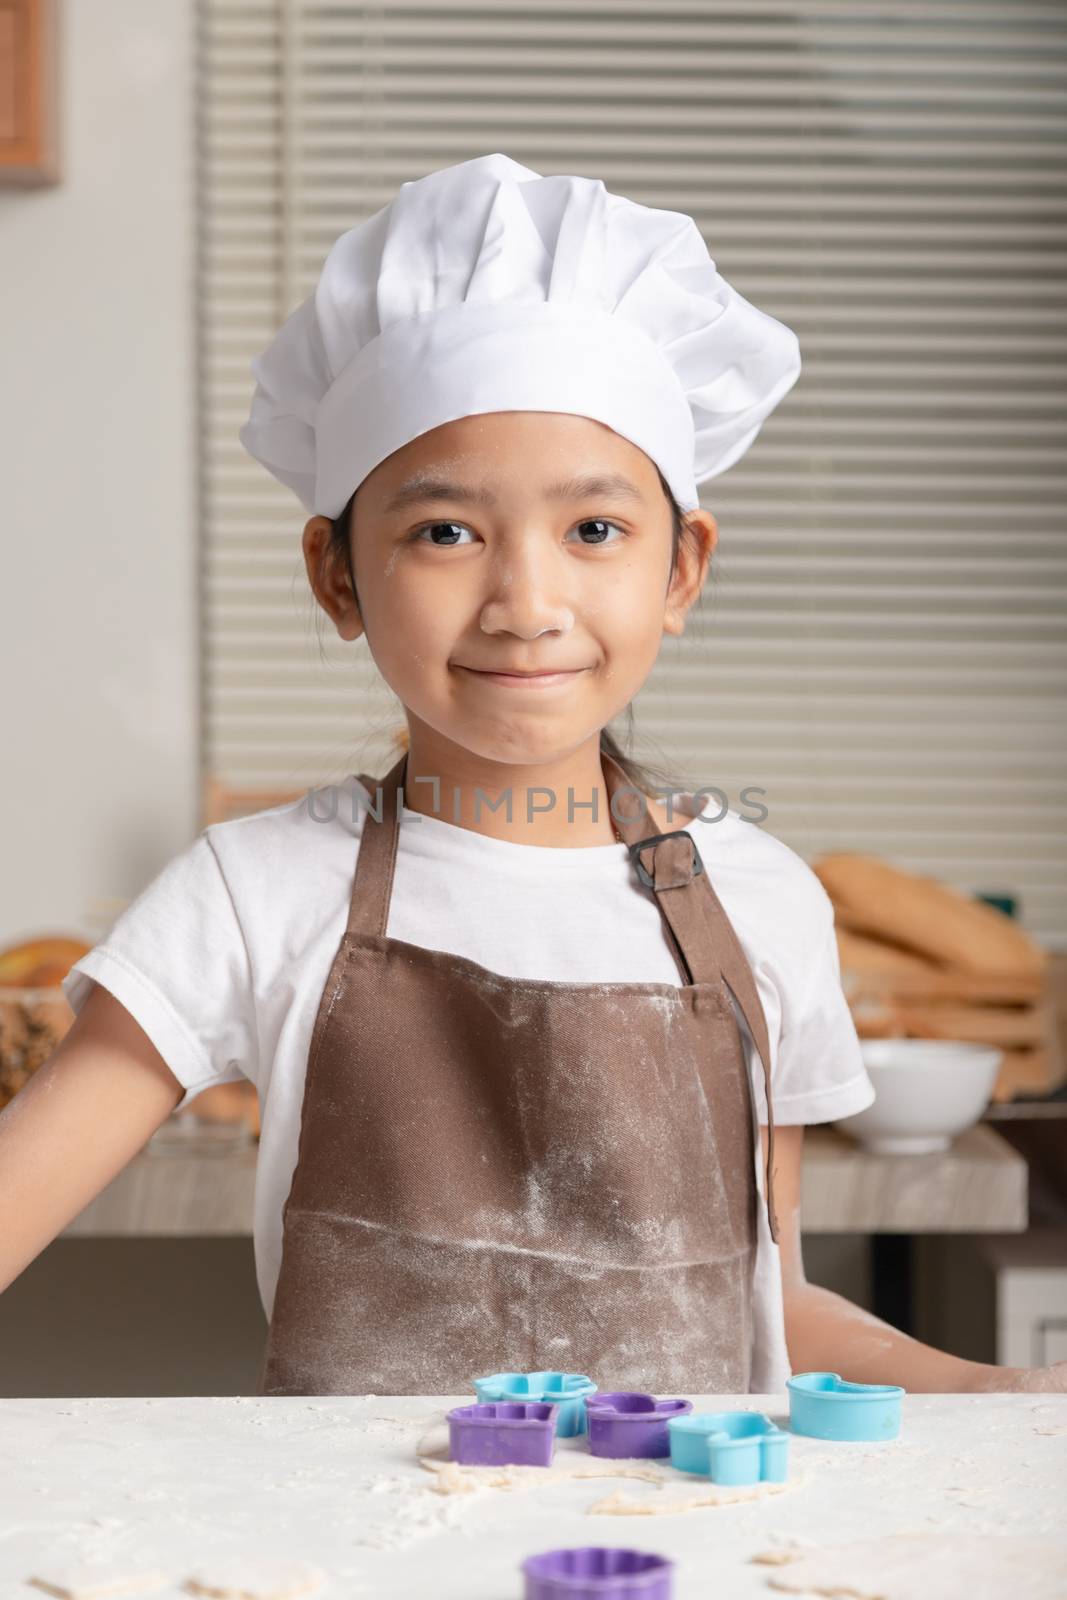 The little girl wore a white chef hat and a brown apron. The kid making homemade bakery in the kitchen. Children smiling with happiness.